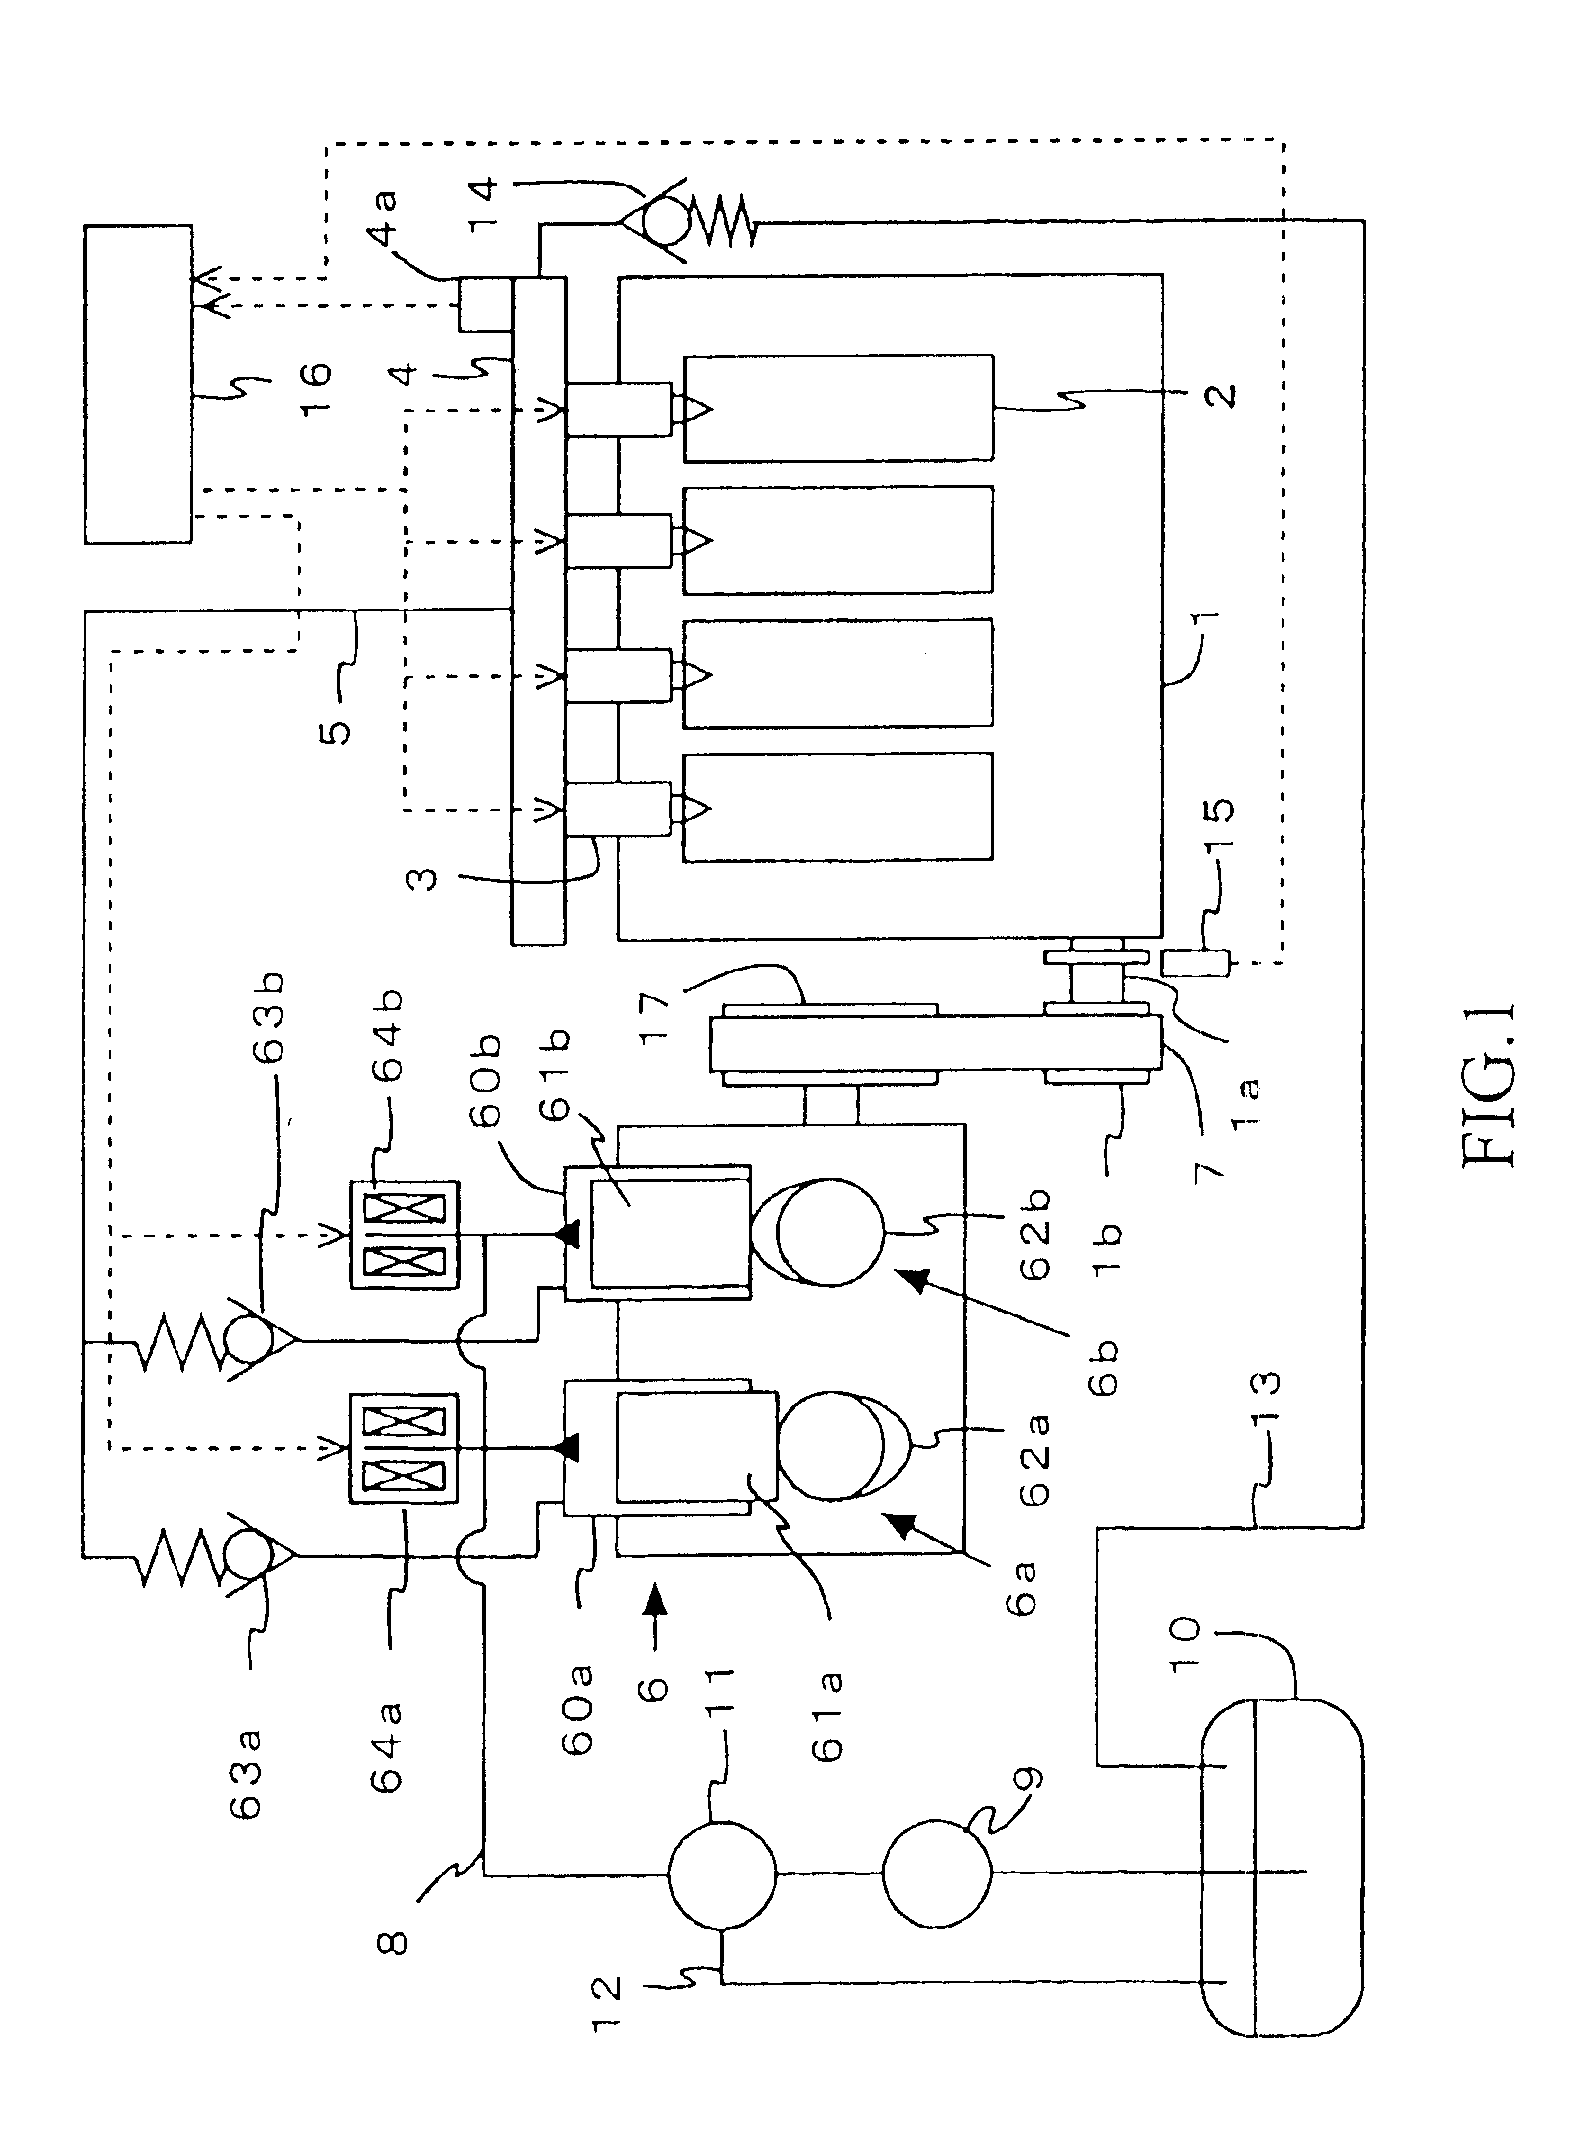 Fuel supply system for internal combustion engine